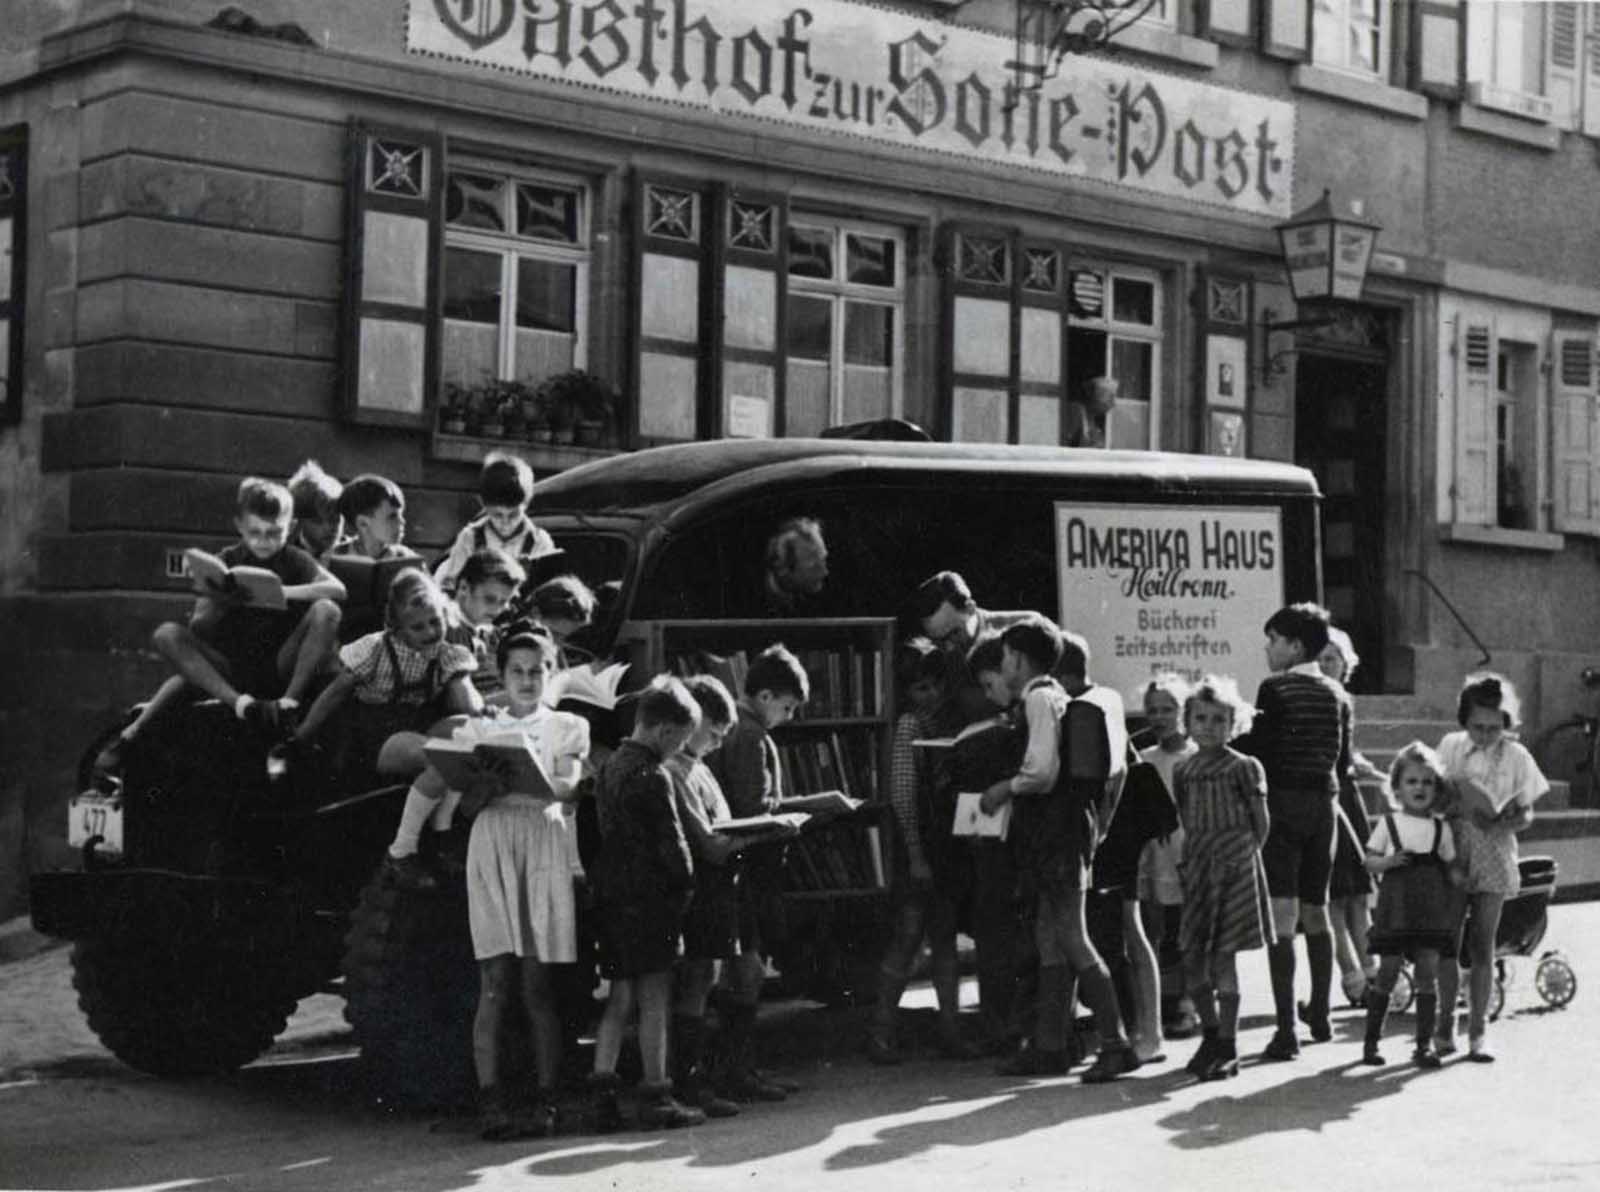 A bookmobile in Germany, late 1940s.